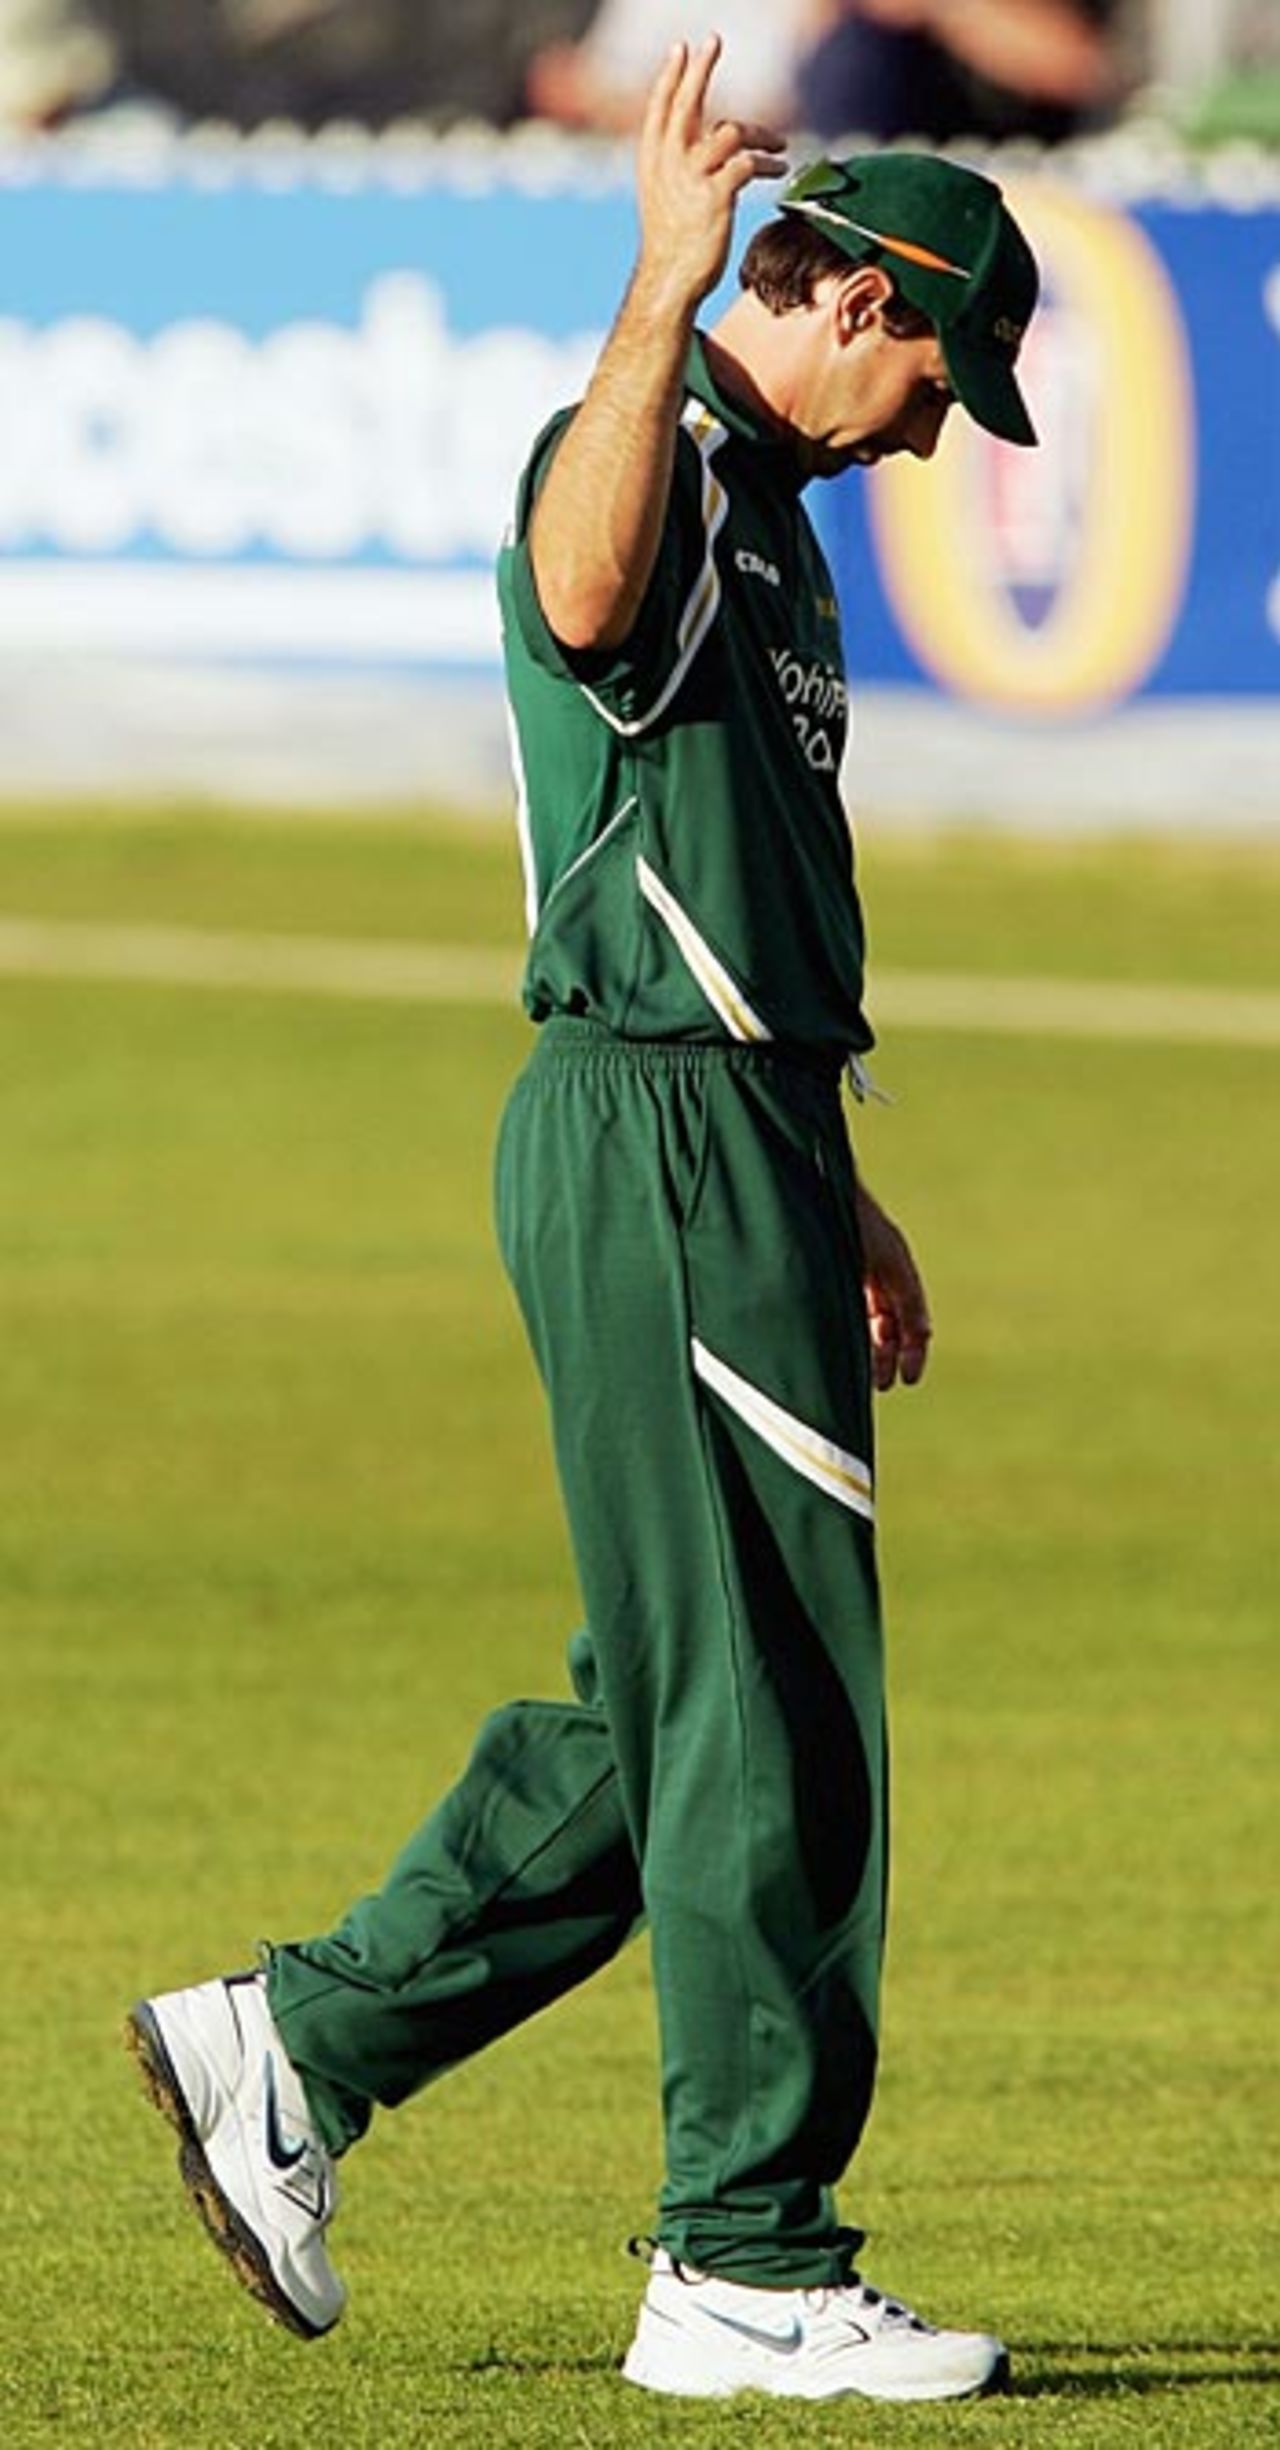 Stephen Fleming gives two fingers to the crowd after the day-night match at Derby was delayed by sunset, Derbyshire v Nottinghamshire, Derby, June 2, 2006